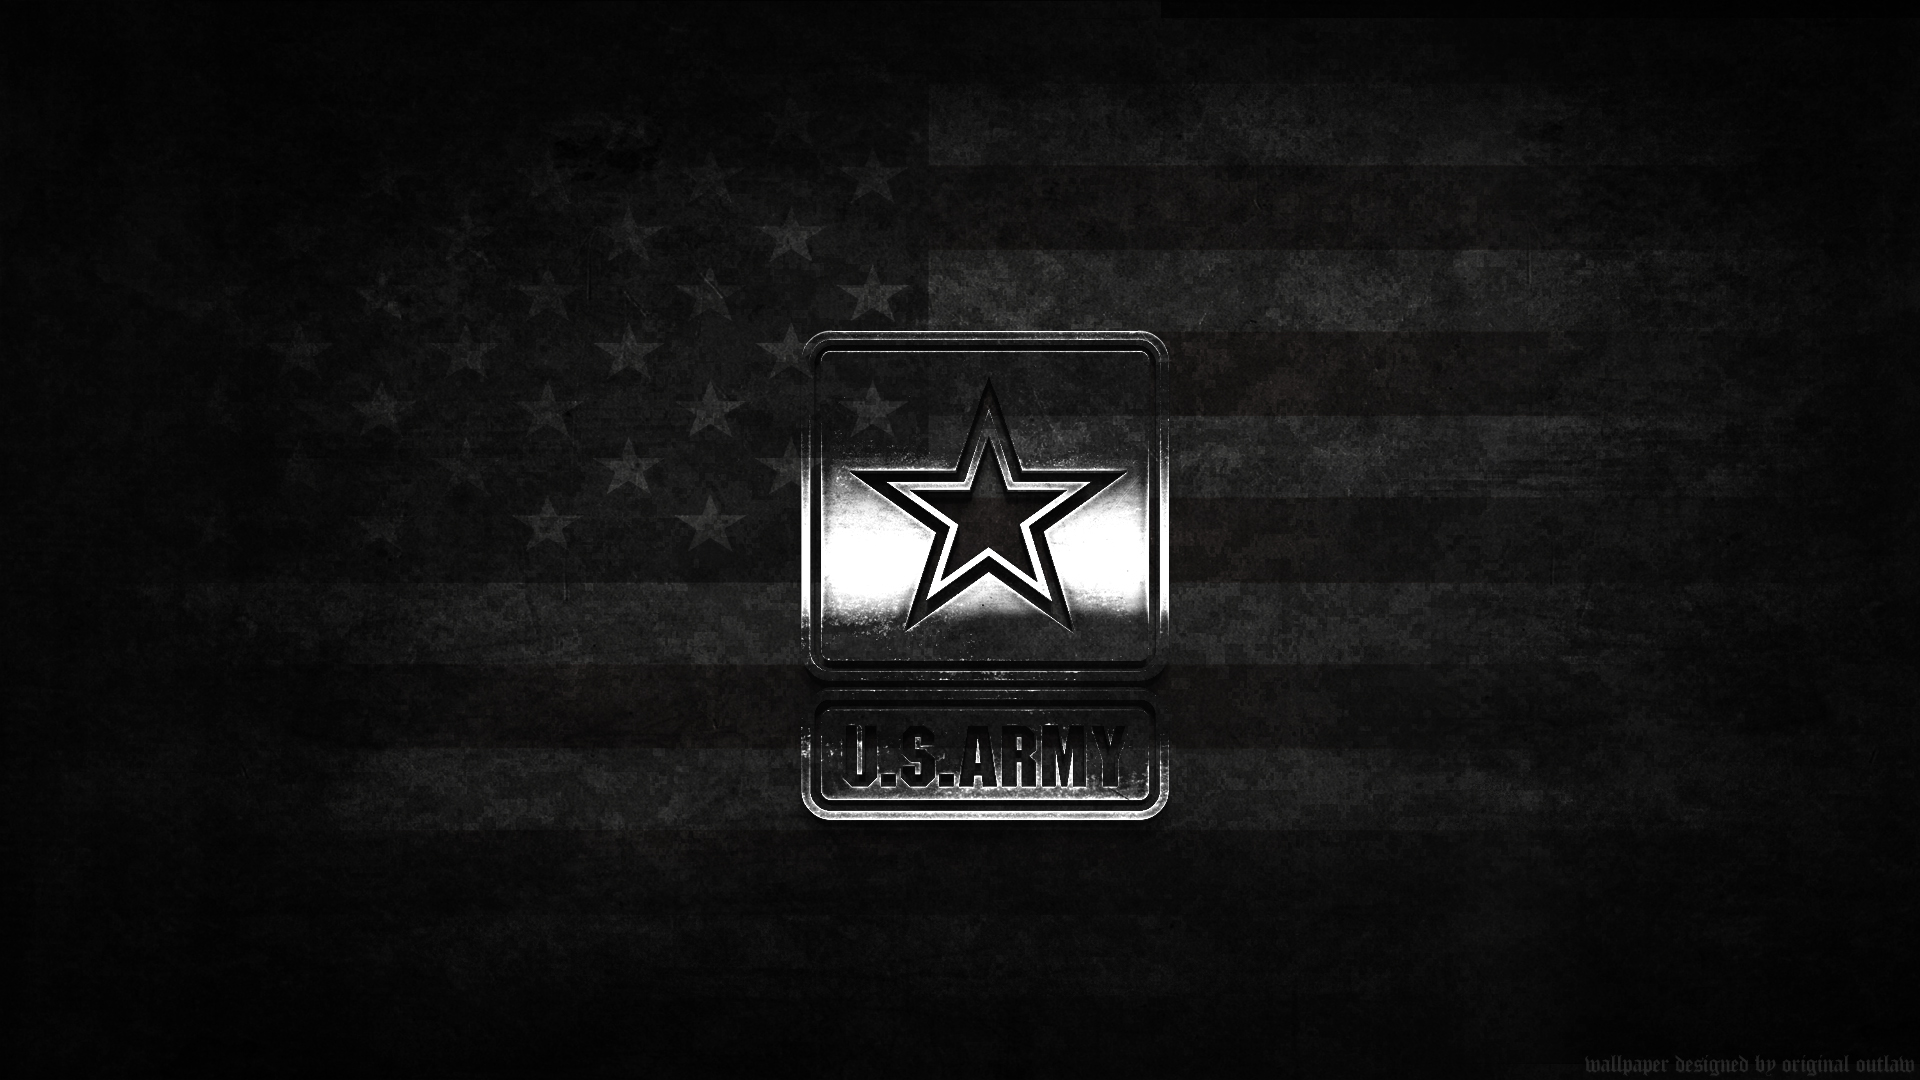 Download image Wallpapers Military Wallpaper United States Army Screen 1920x1080